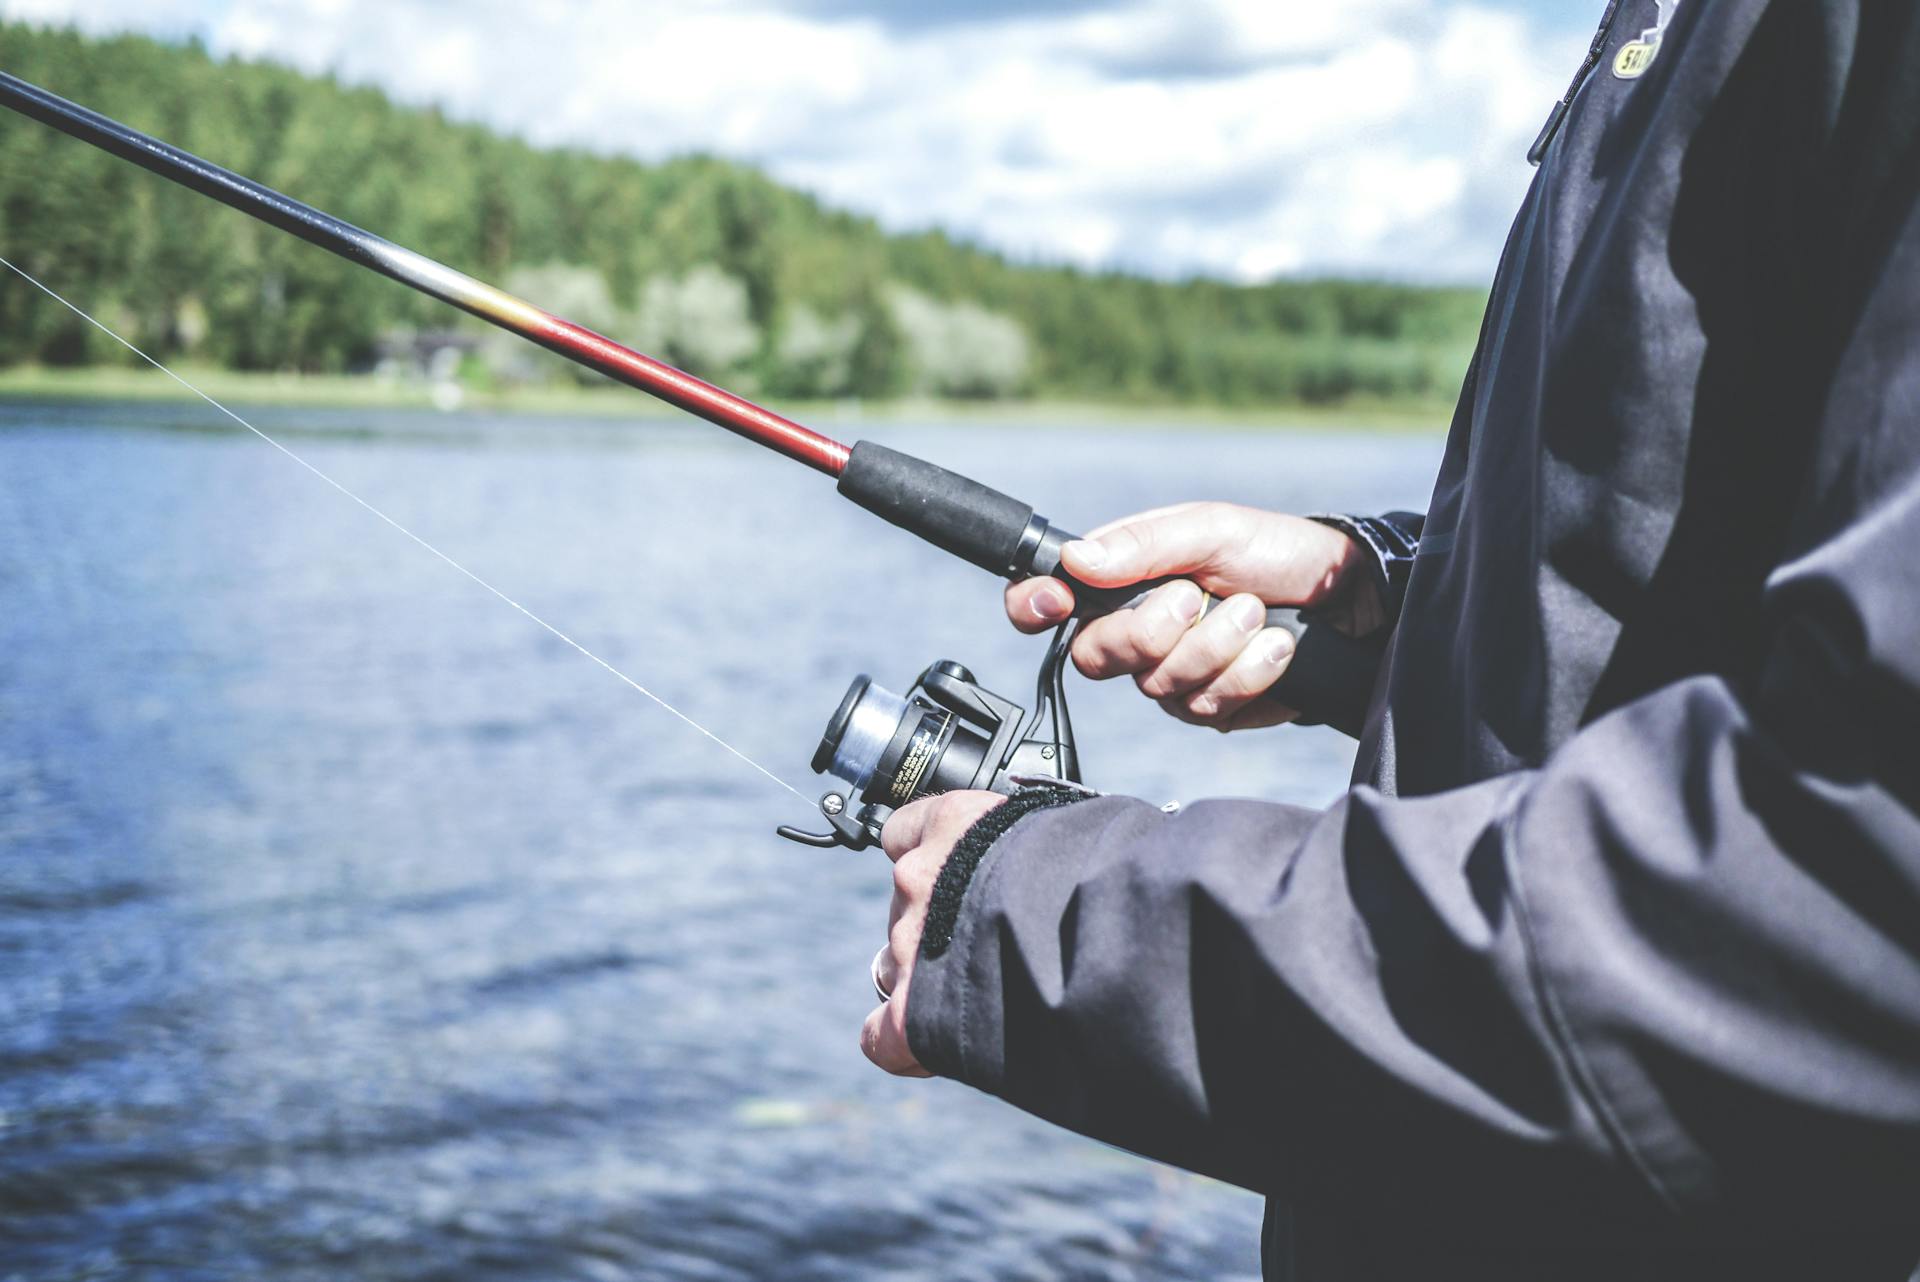 A person engaged in fishing | Source: Pexels